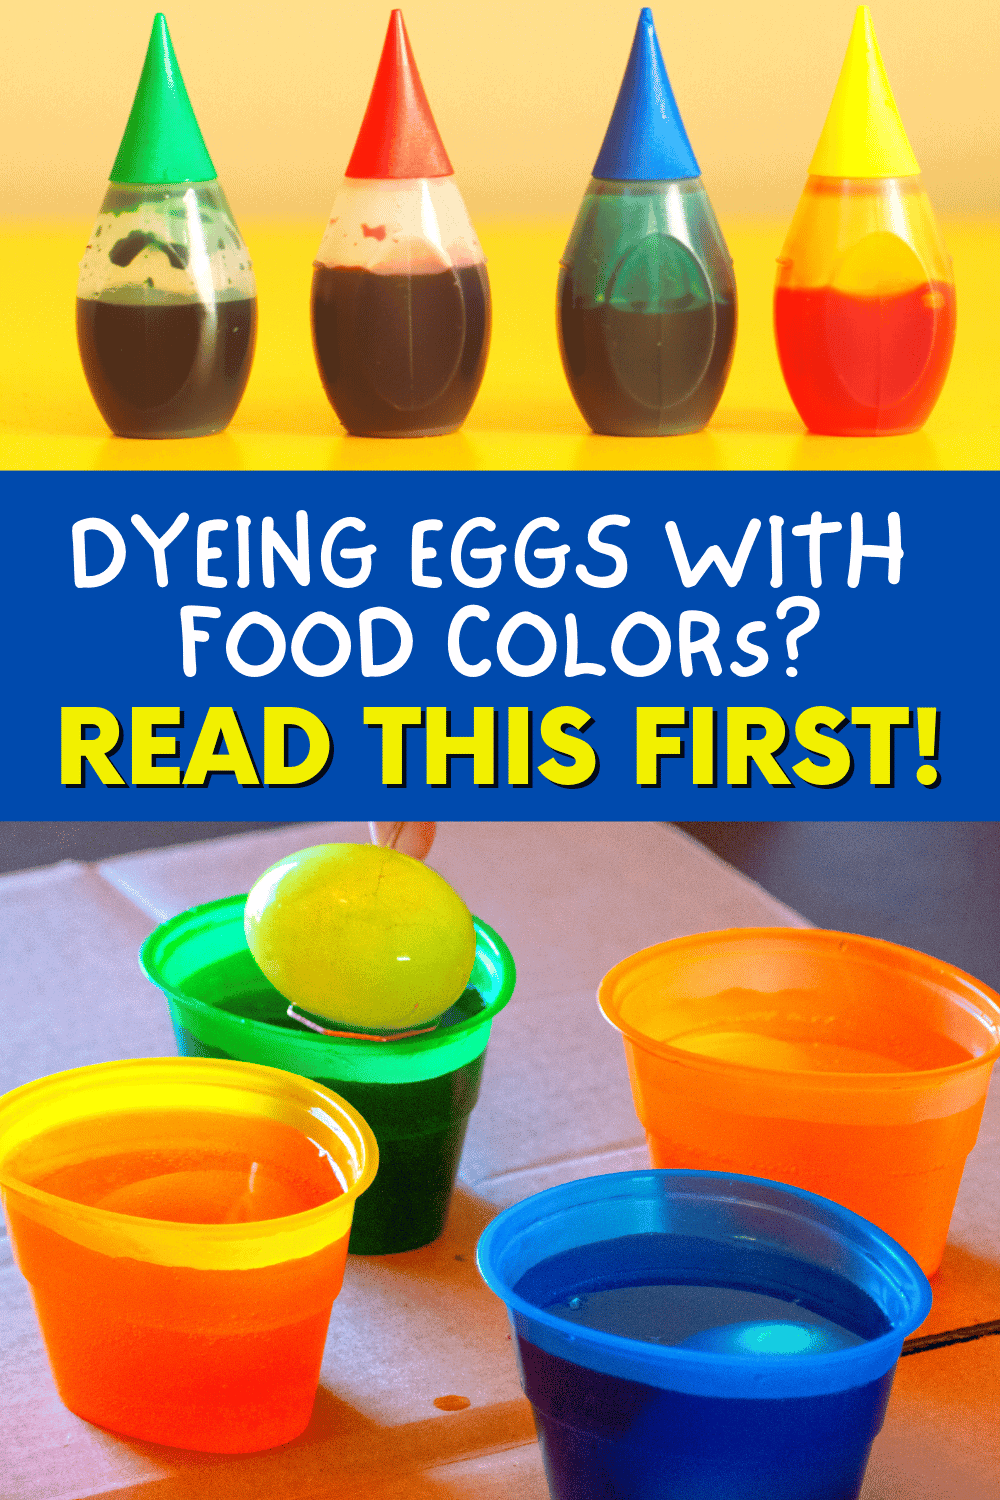 How to dye hard boiled eggs with food coloring (how to dye eggs using food color) text with food coloring and dyed eggs on a table